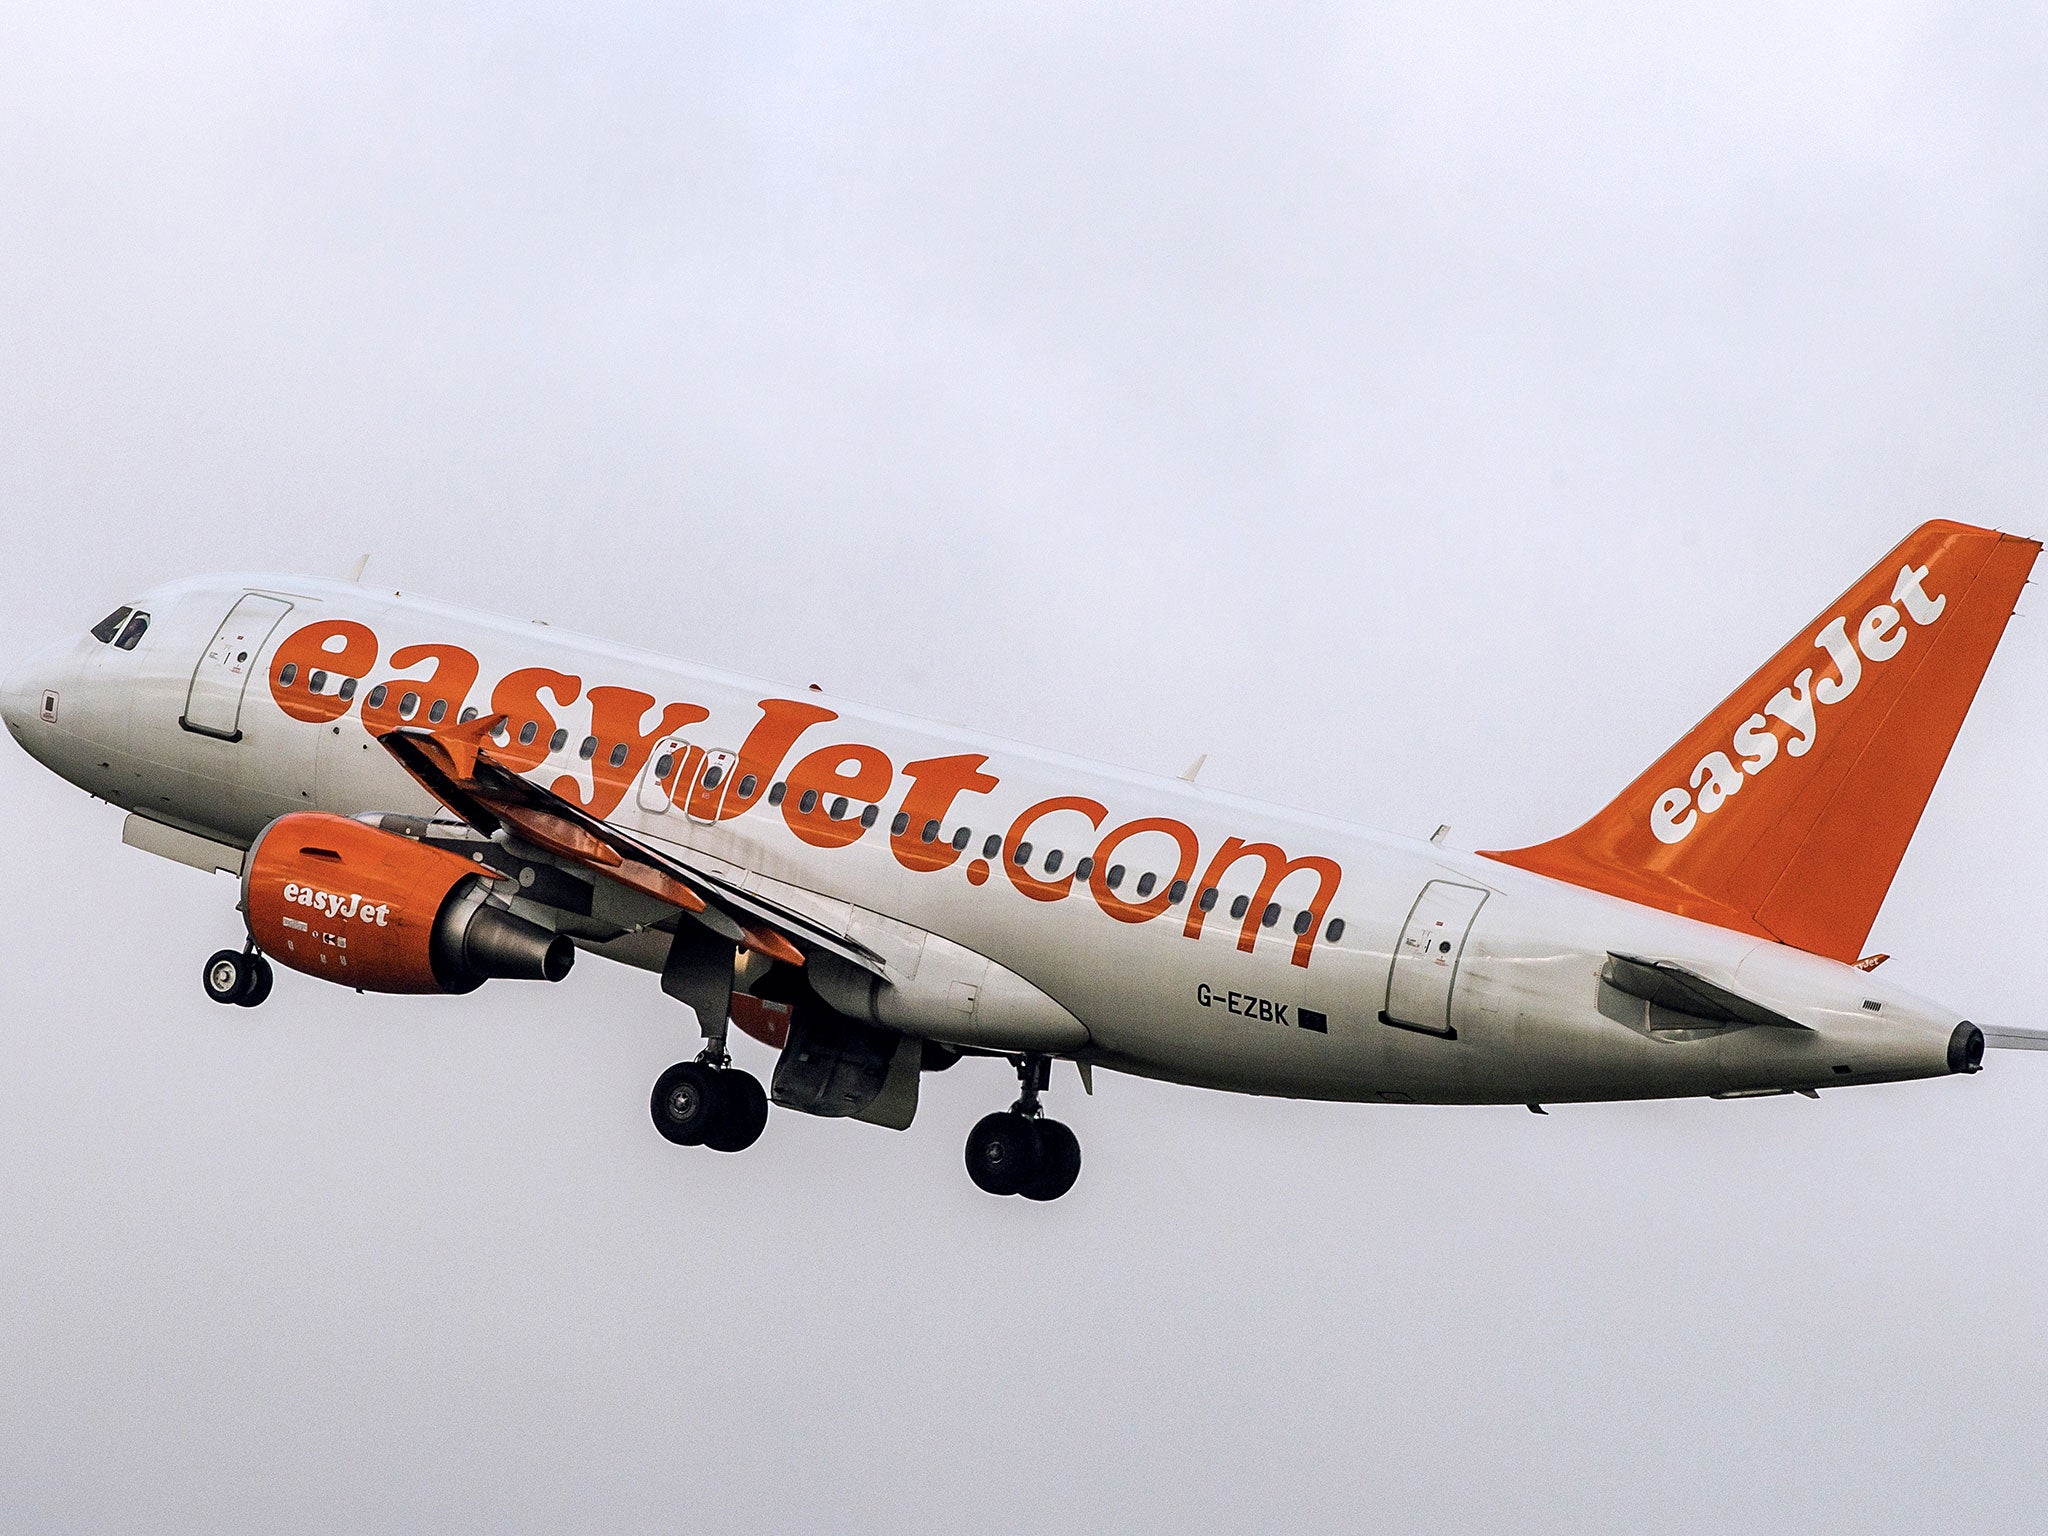 Easyjet has grown to become France’s second biggest airline